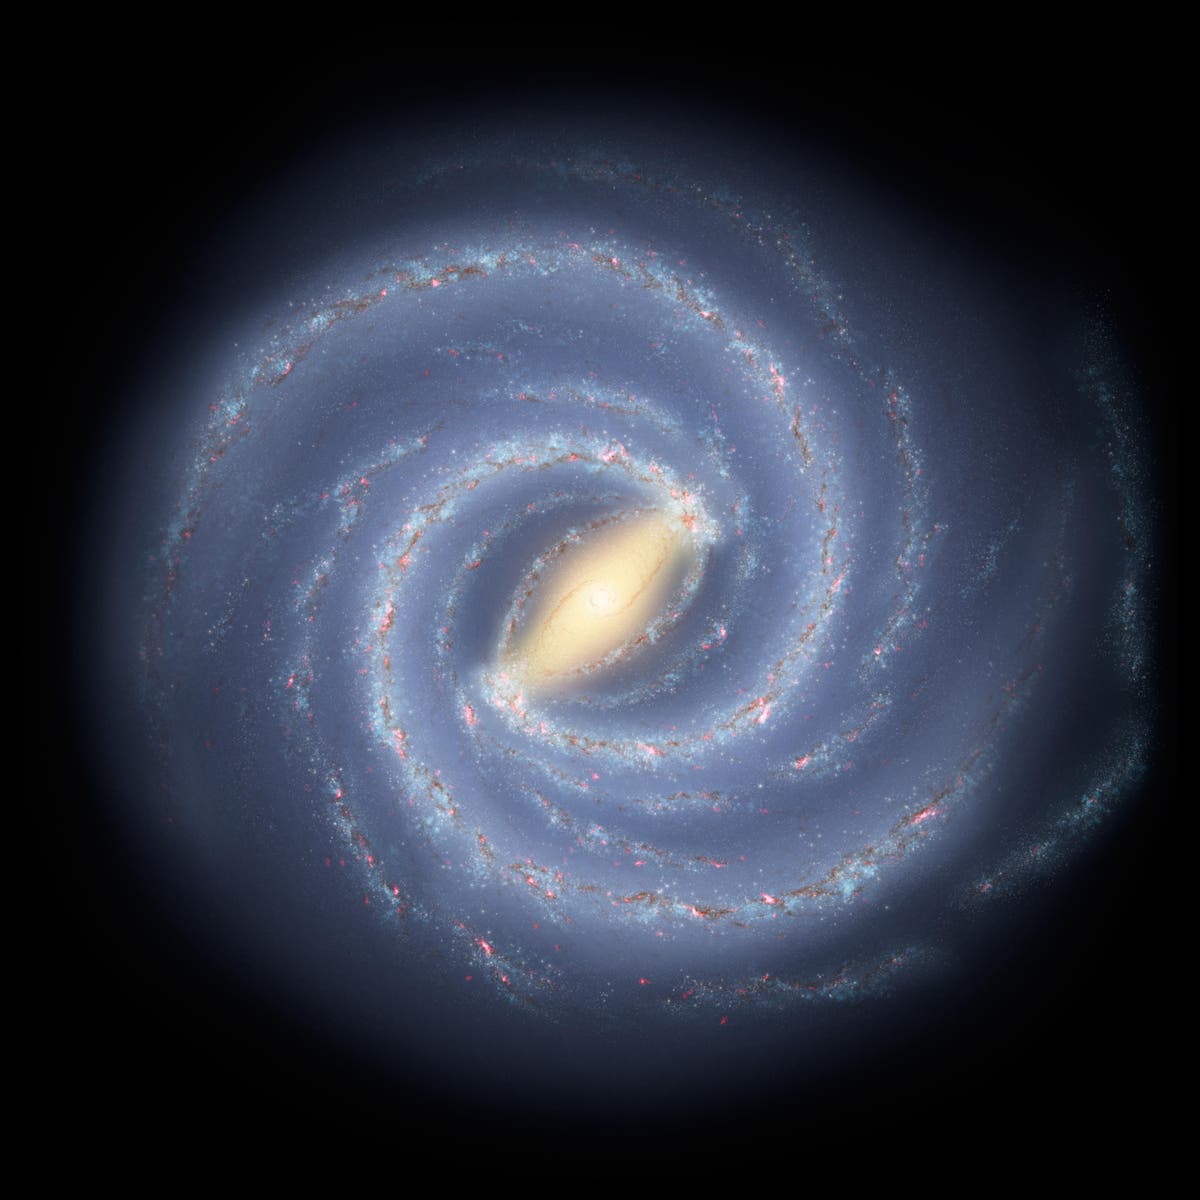 Scientists already know how old the Milky Way is